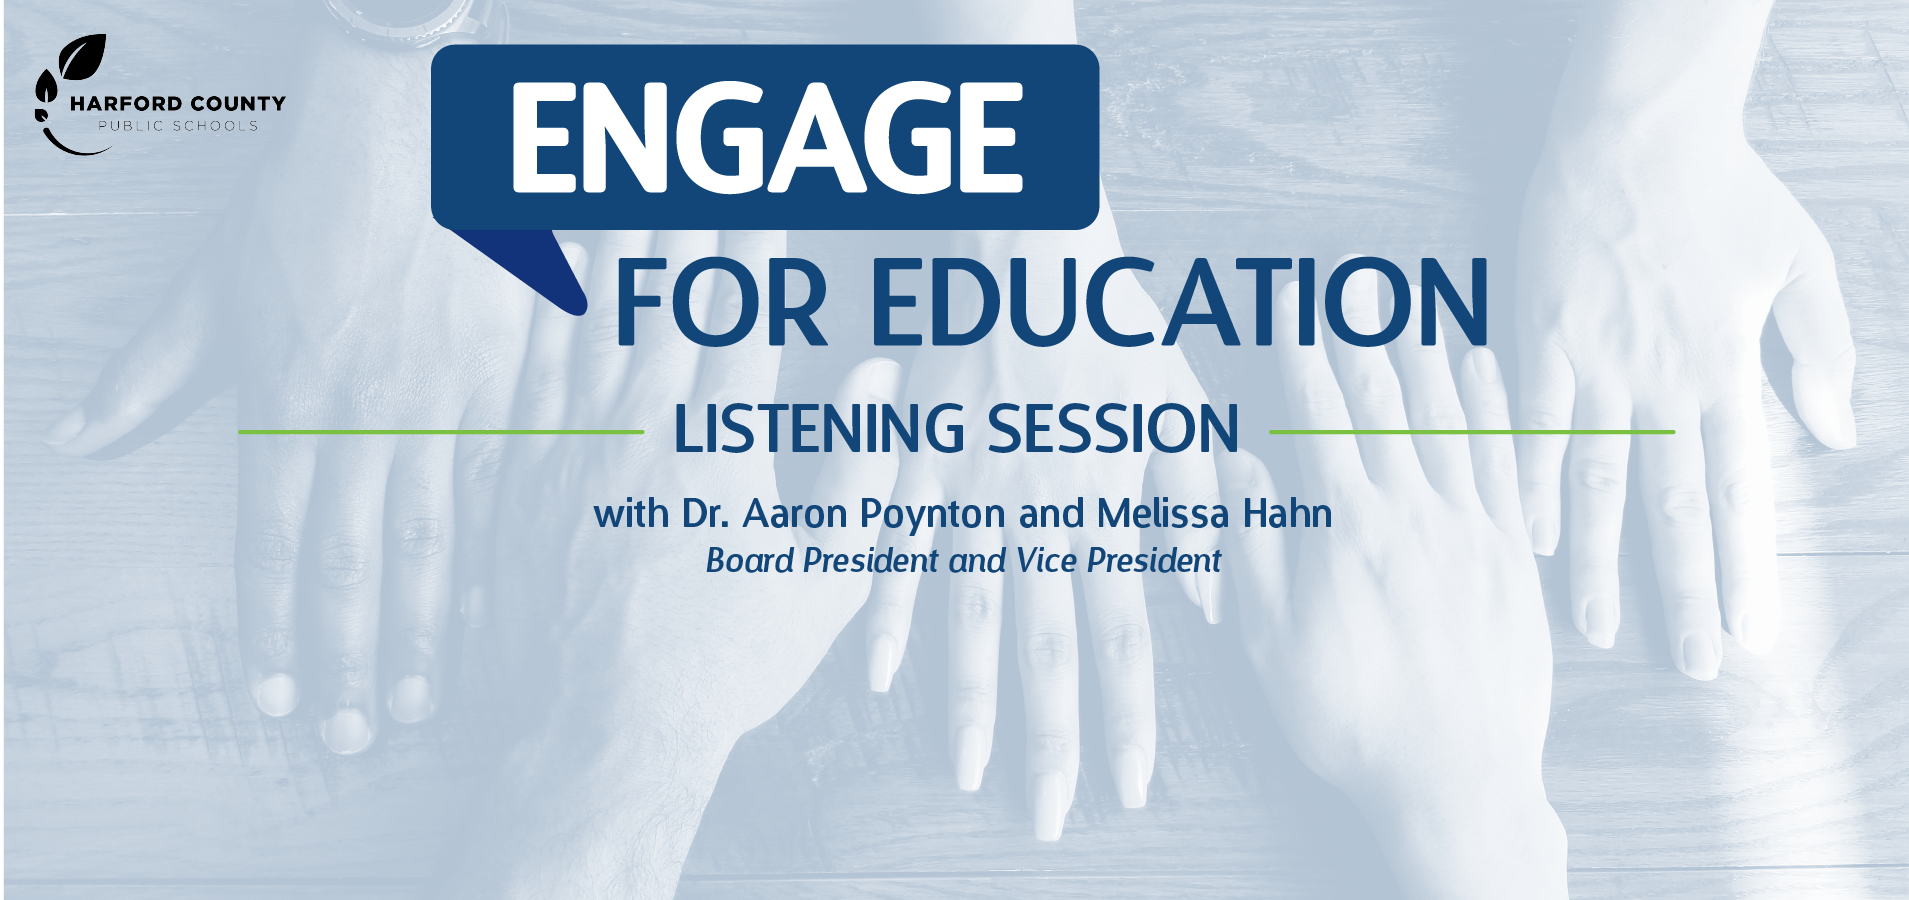 Engage for Education listening session with Dr. Aaron Poynton and Melissa Hahn